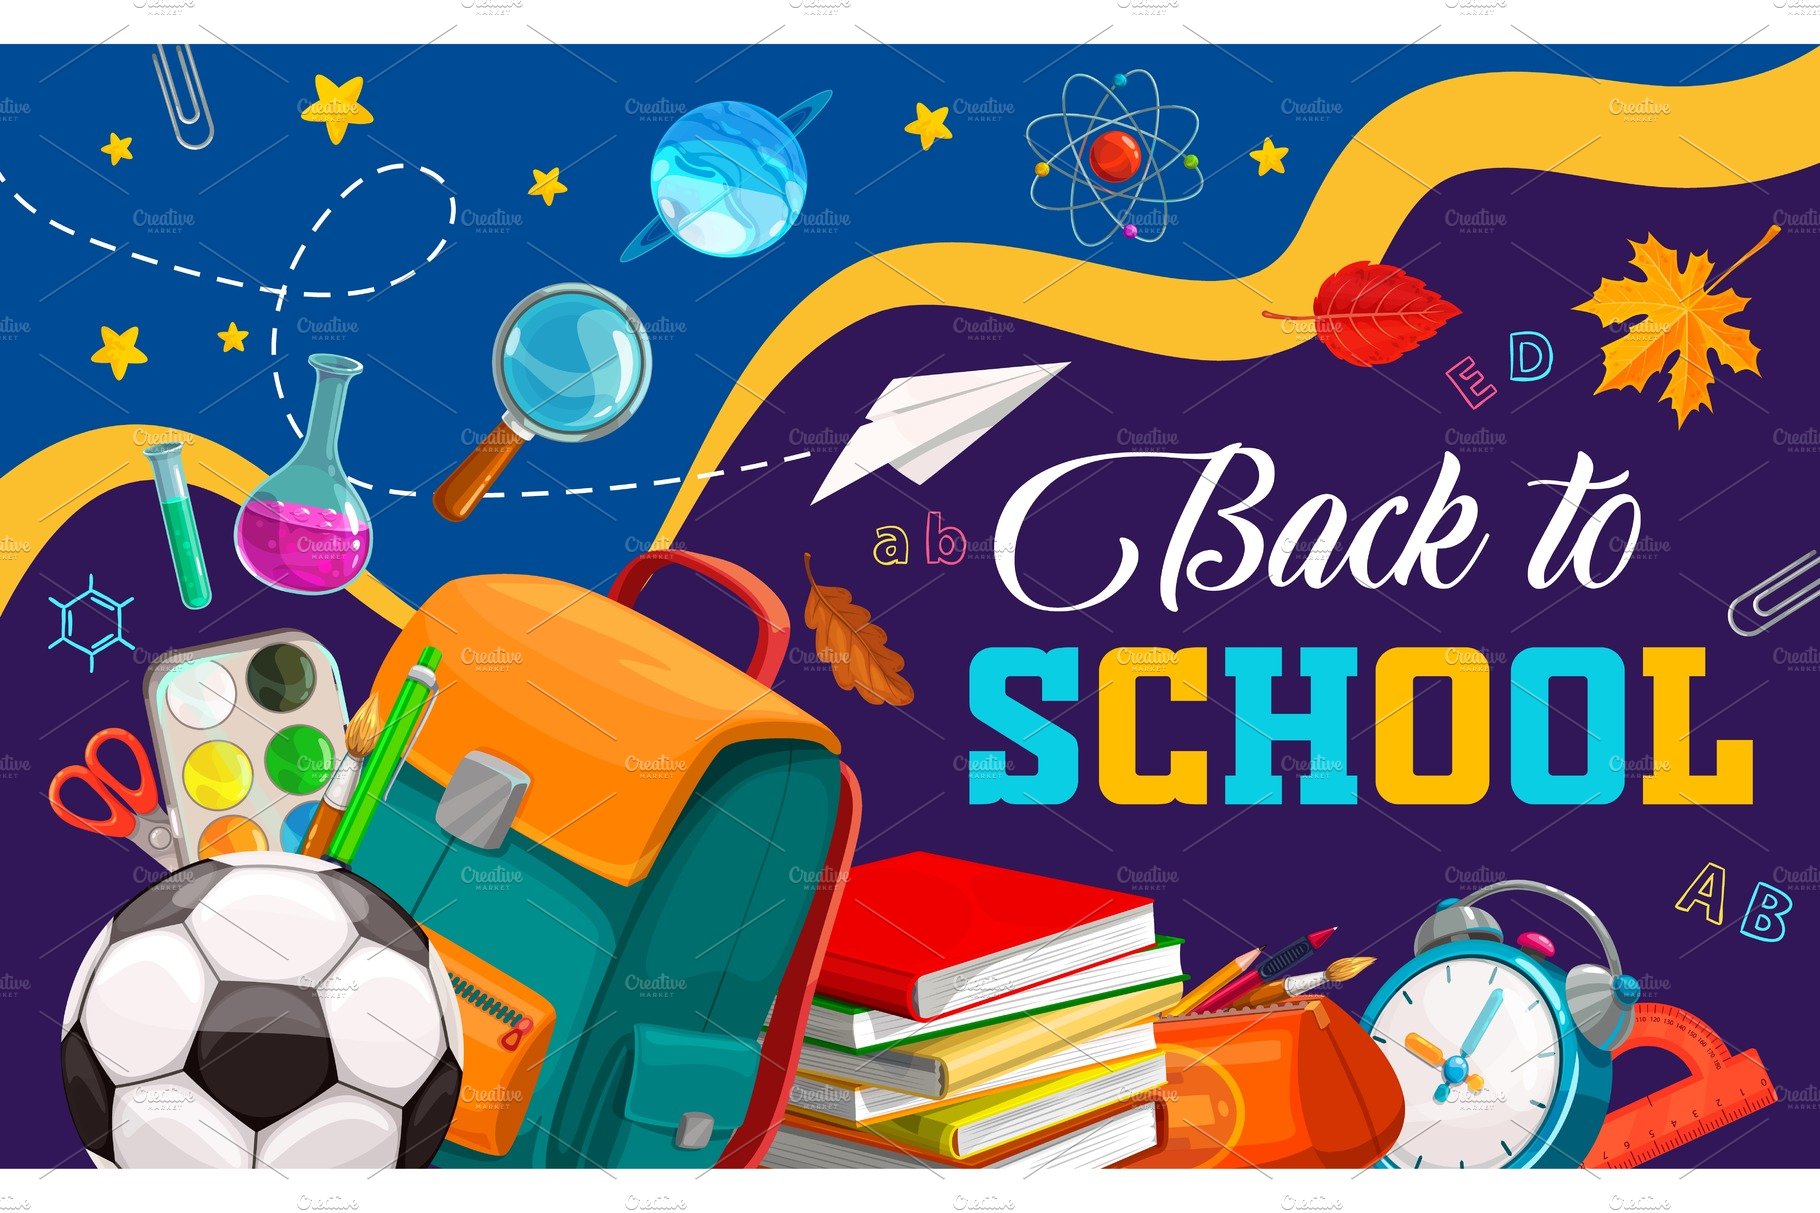 Back to school and education cover image.